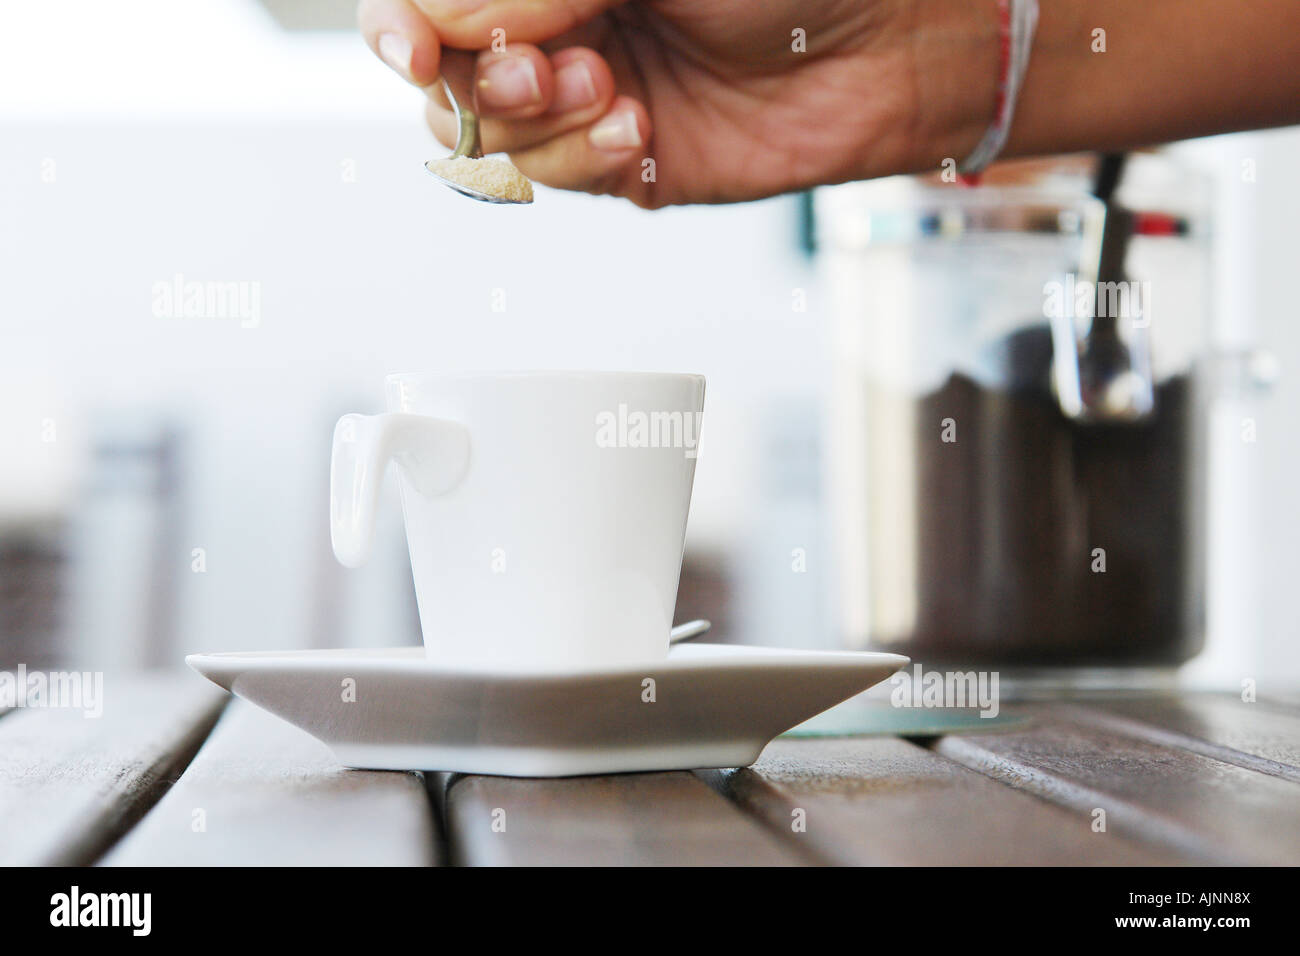 Woman putting sugar in a cup of coffee Stock Photo